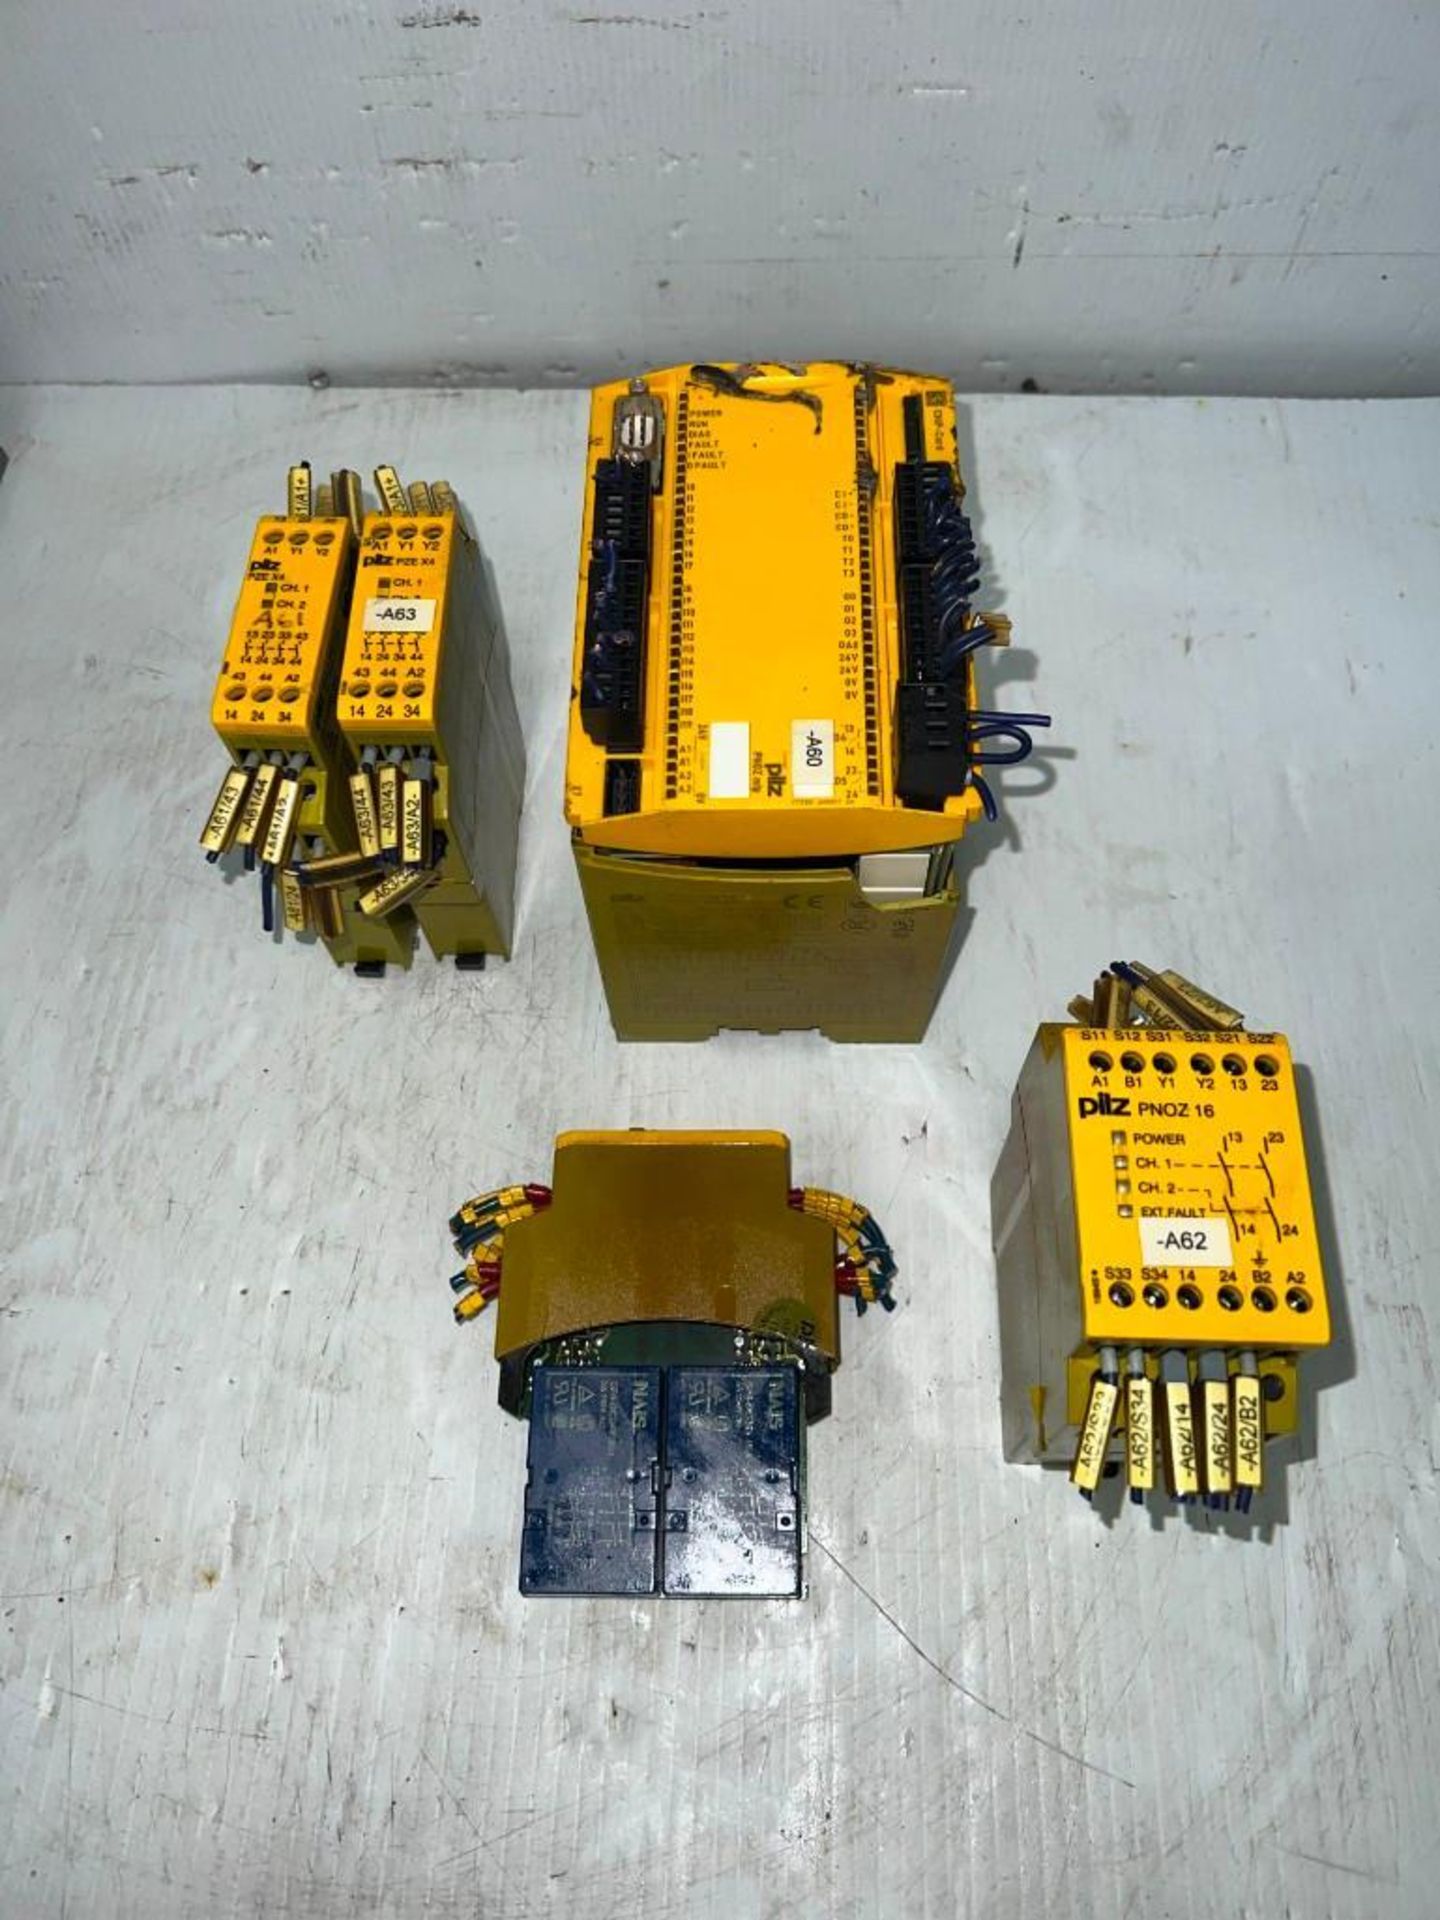 Lot of Pilz Modules (Some have a broken casing)